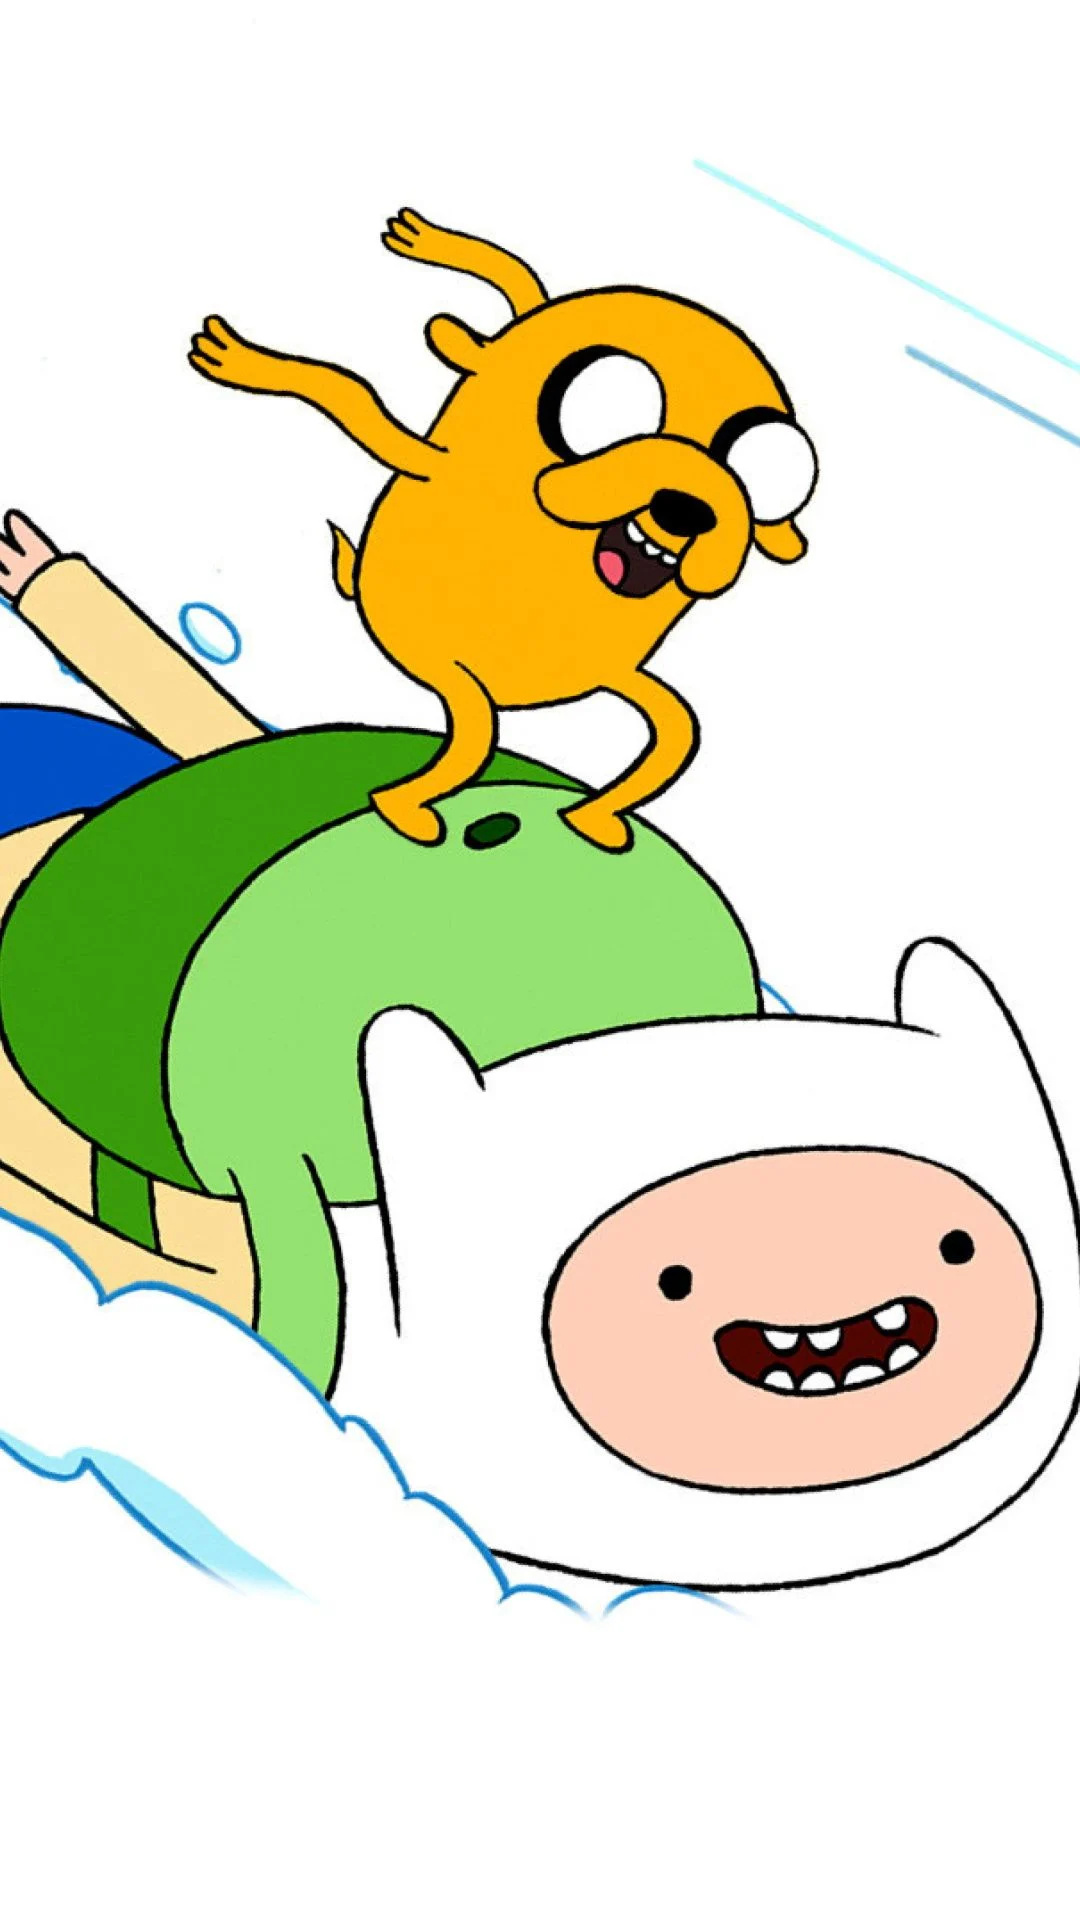 Finn and Jake wallpapers, Adventure Time backgrounds, Animated series, Cartoon characters, 1080x1920 Full HD Handy